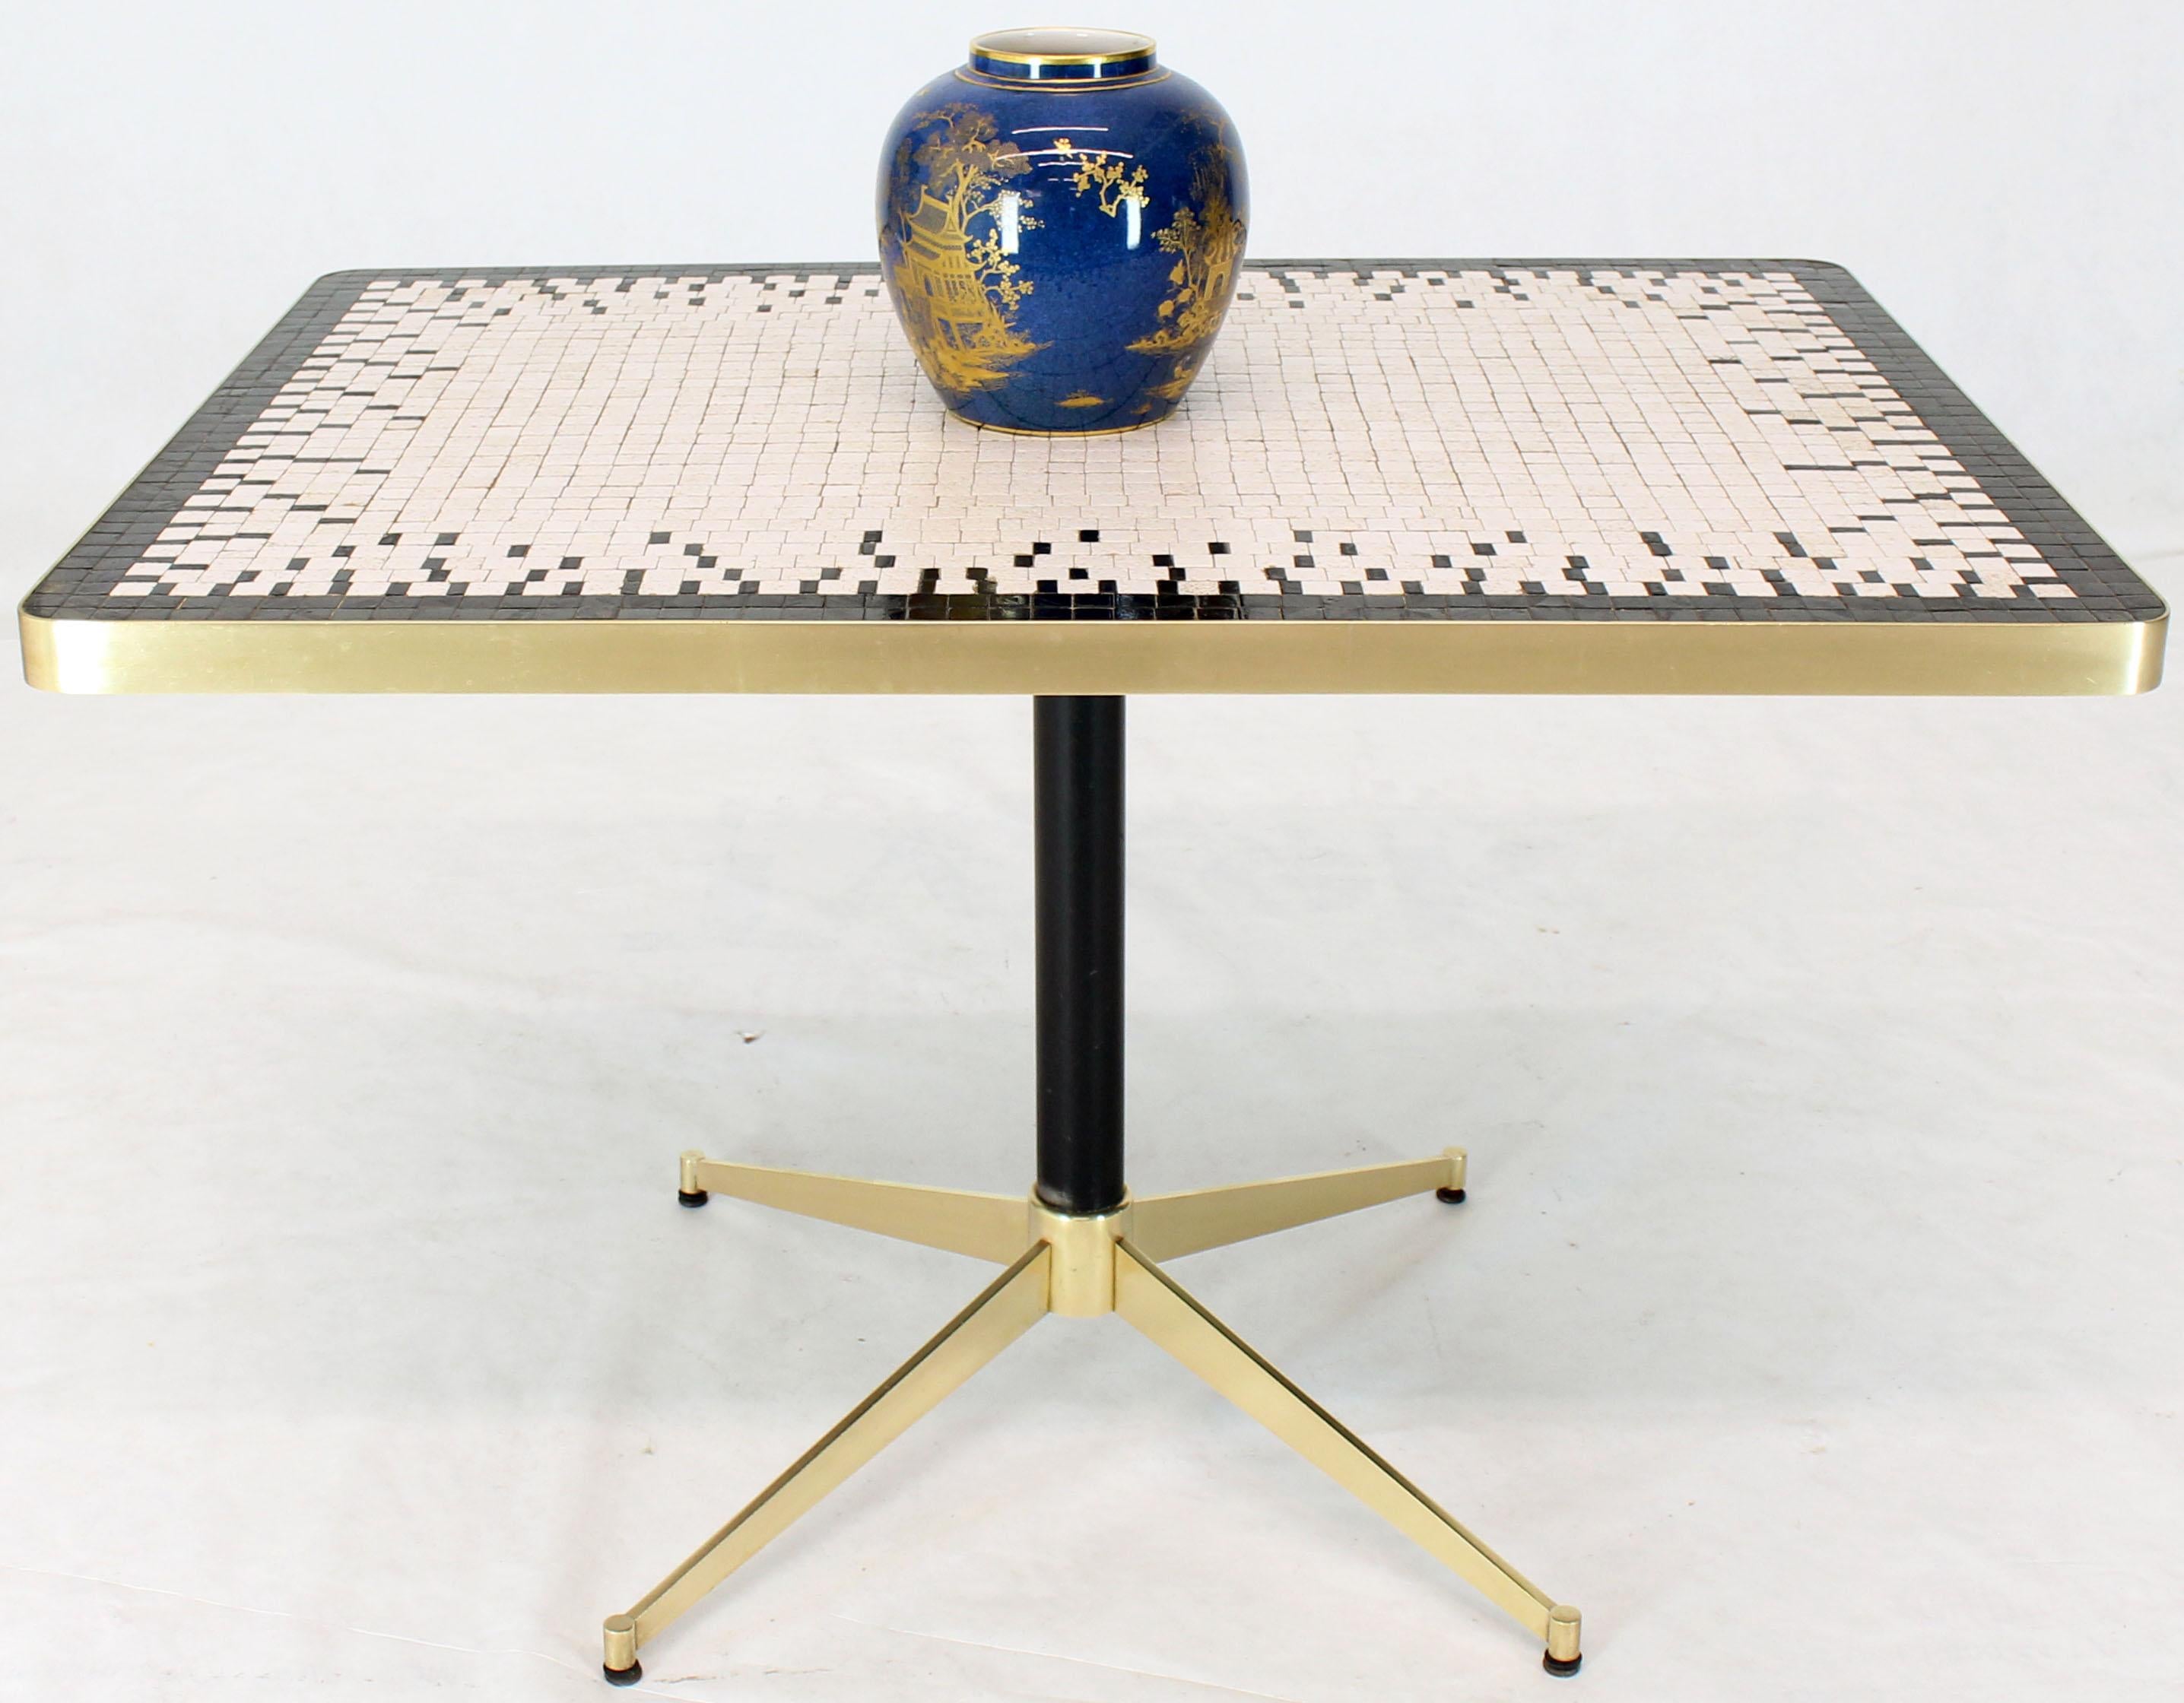 Machined Solid Brass X-Shape Base Mosaic Top Cafe Table For Sale 2